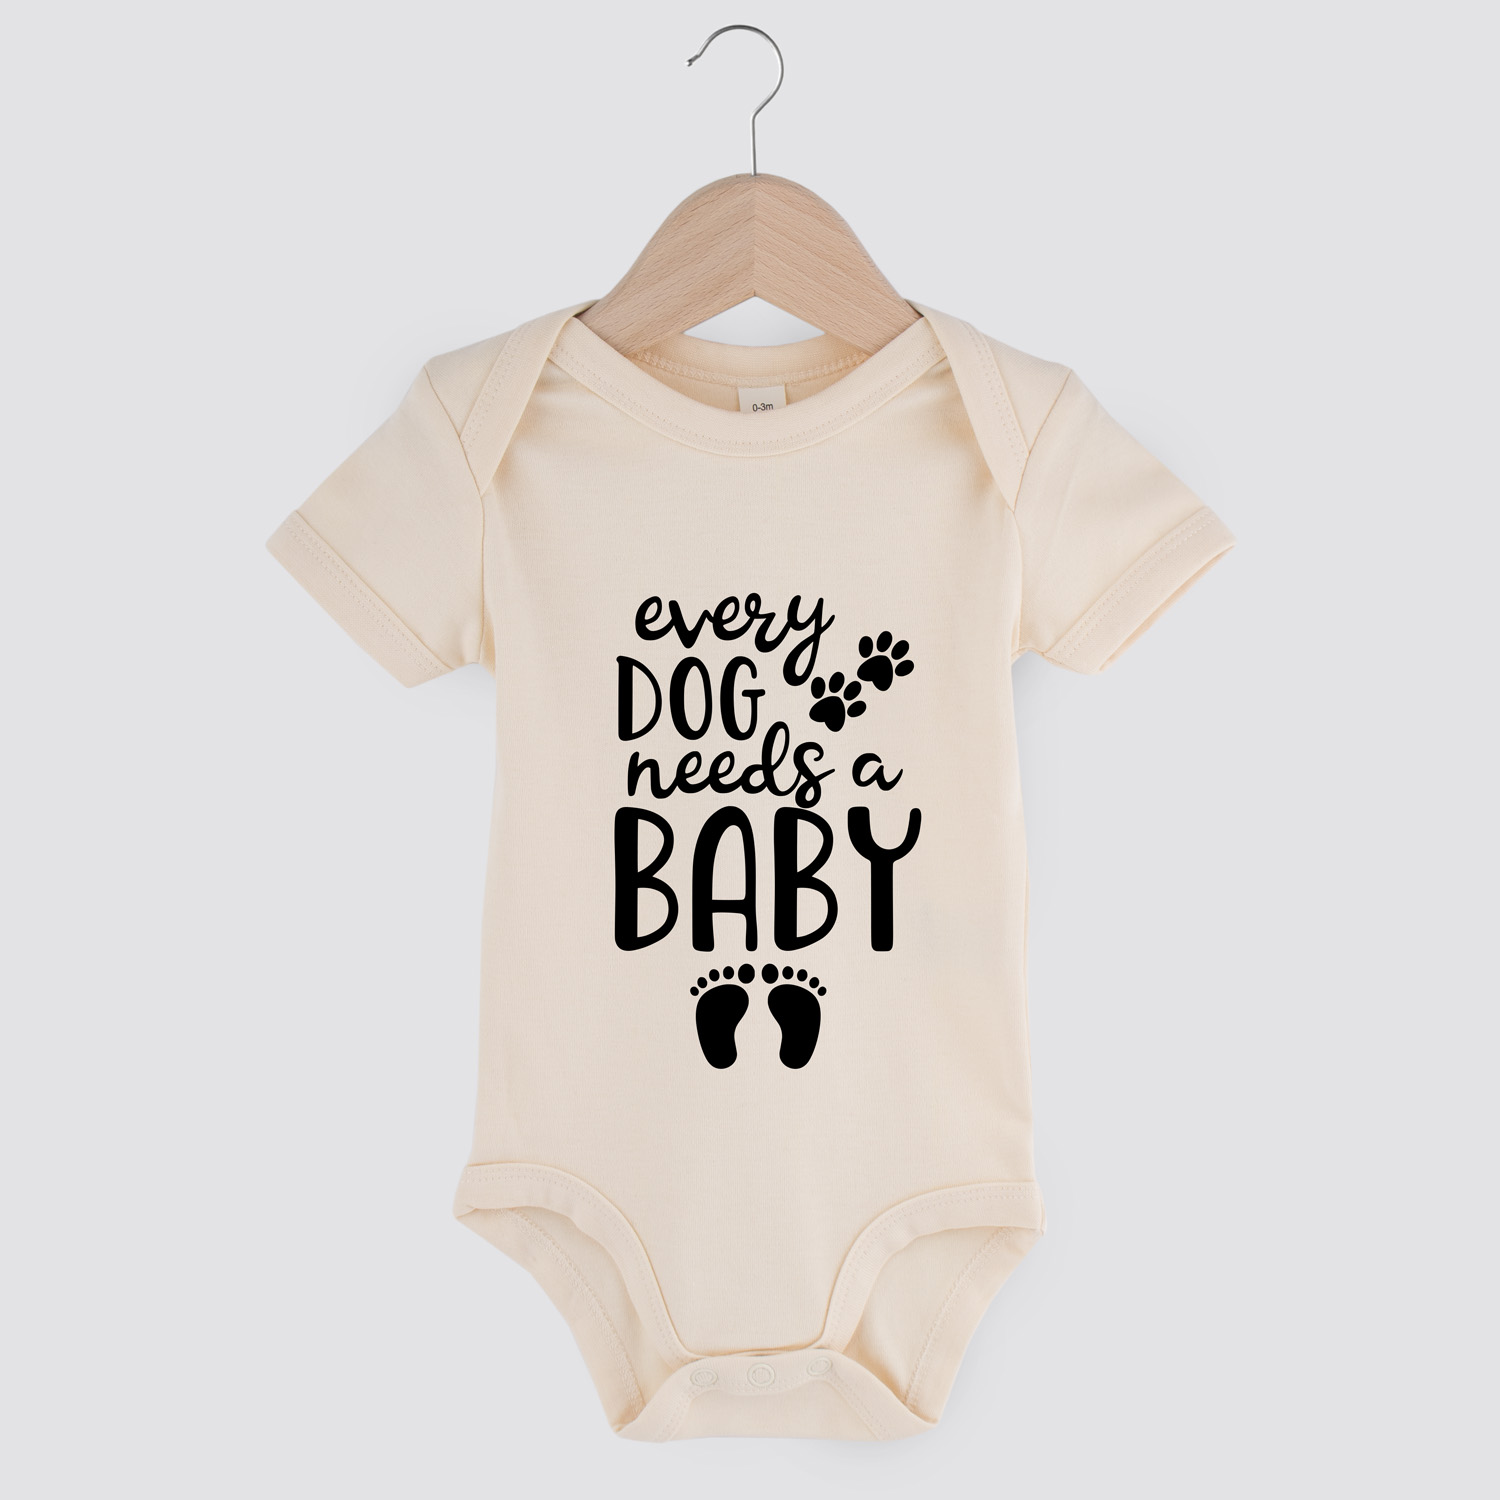 every-dog-needs-a-baby-baby-romper-natural.jpg